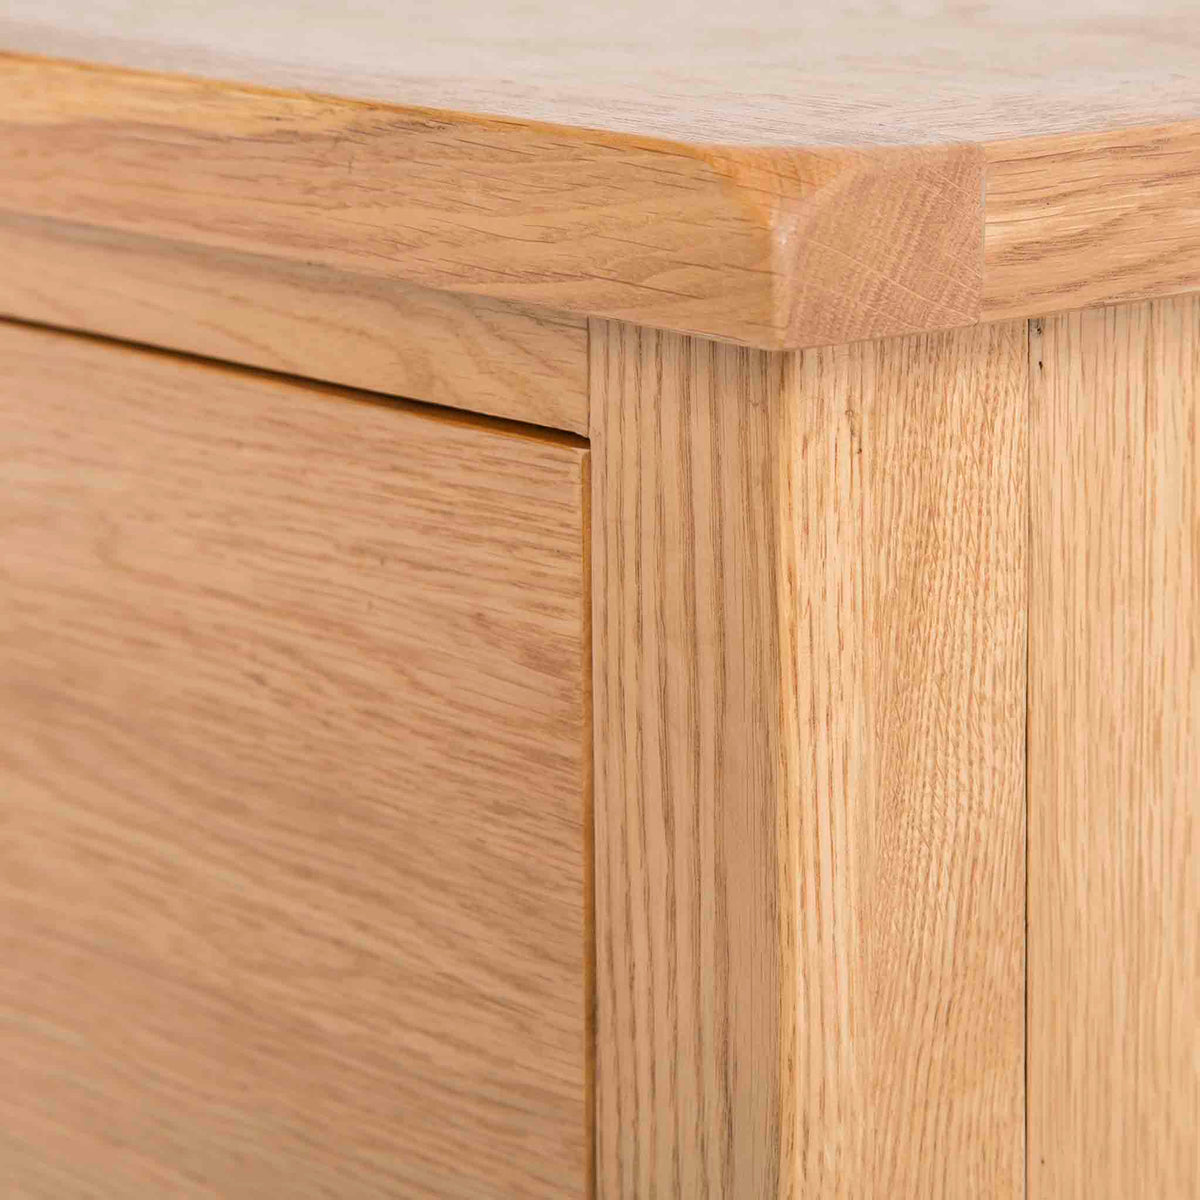 Surrey Oak waxed 5 drawer wide chest - Close Up of Top Corner